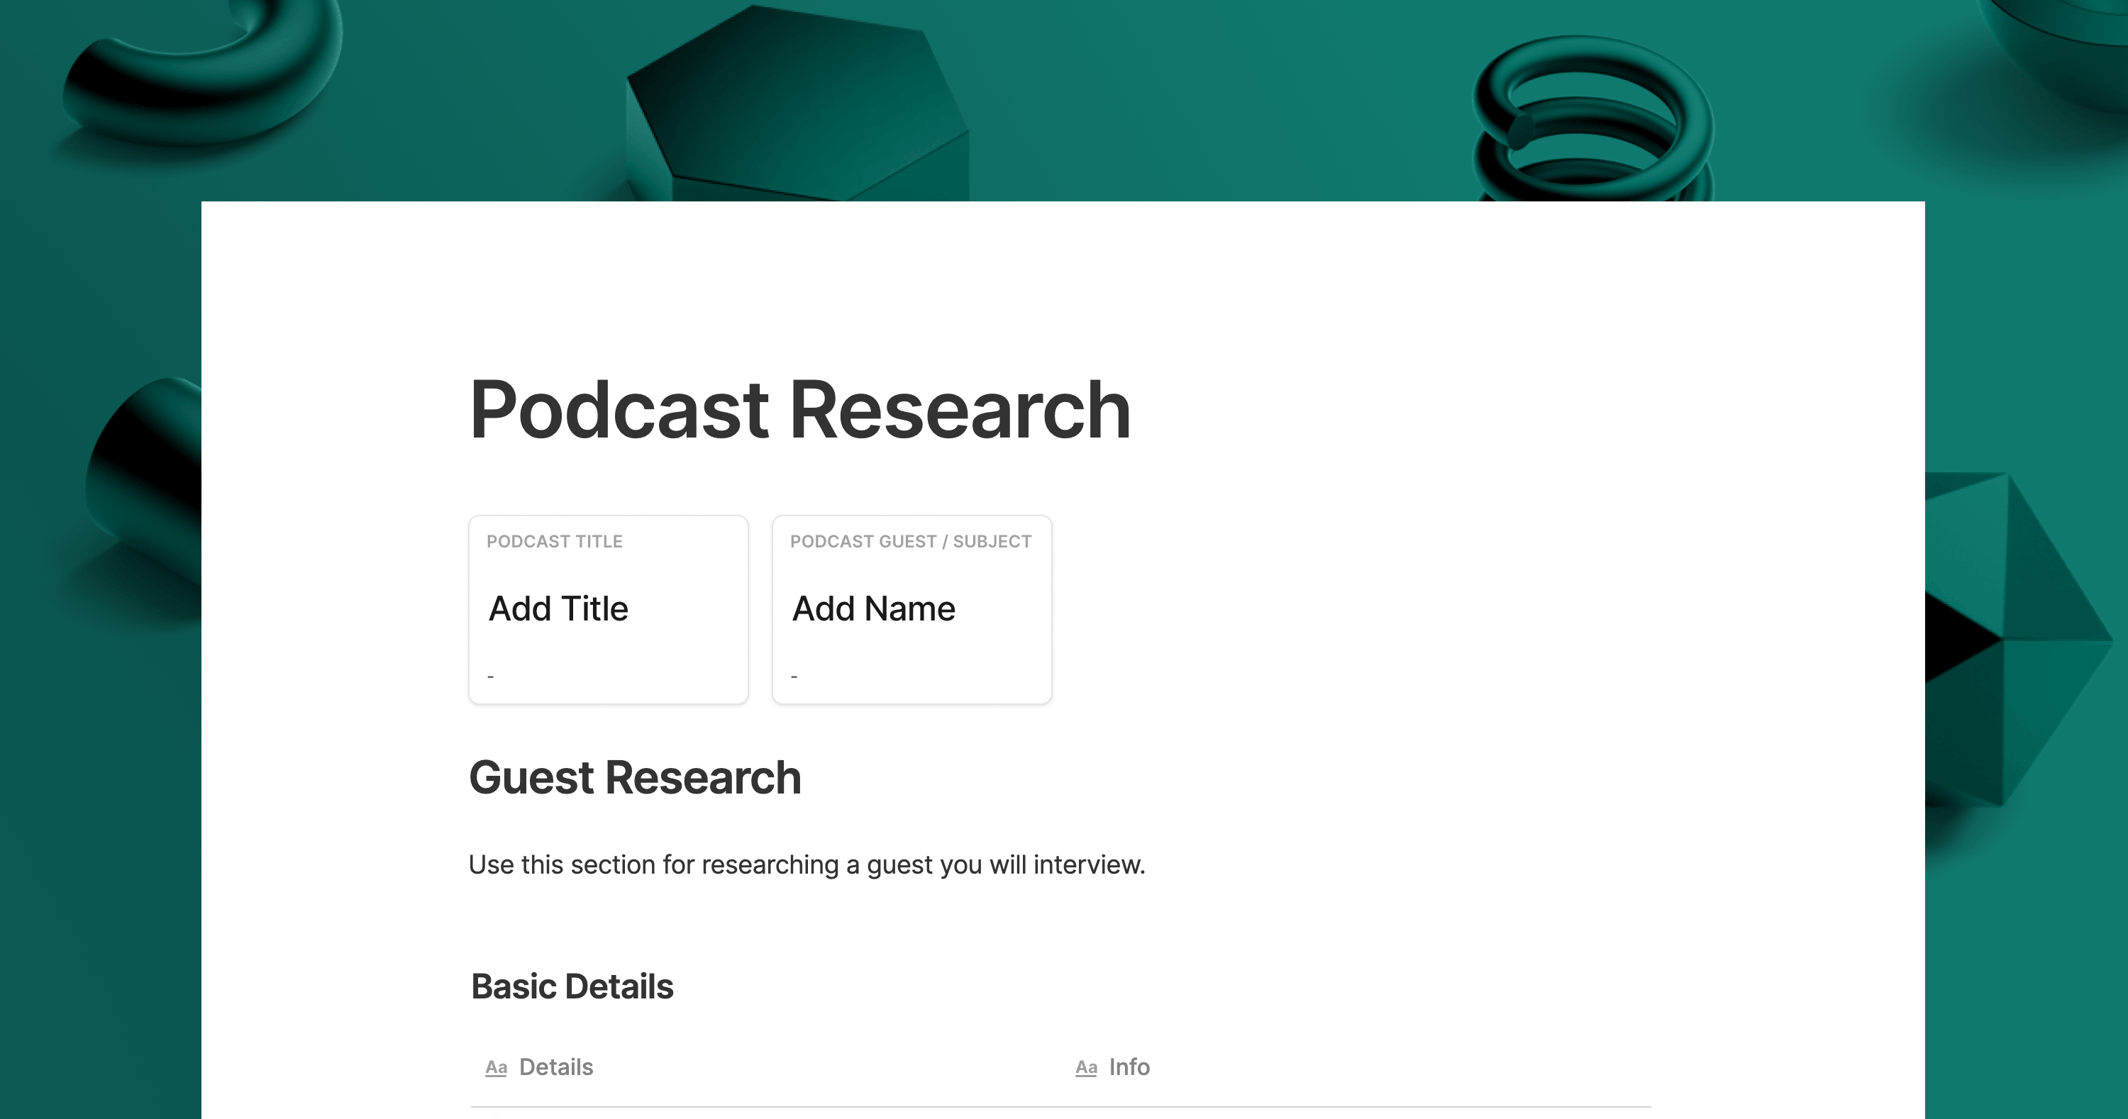 https://3389140.fs1.hubspotusercontent-na1.net/hubfs/3389140/podcast%20research%20template%20cover-1.png